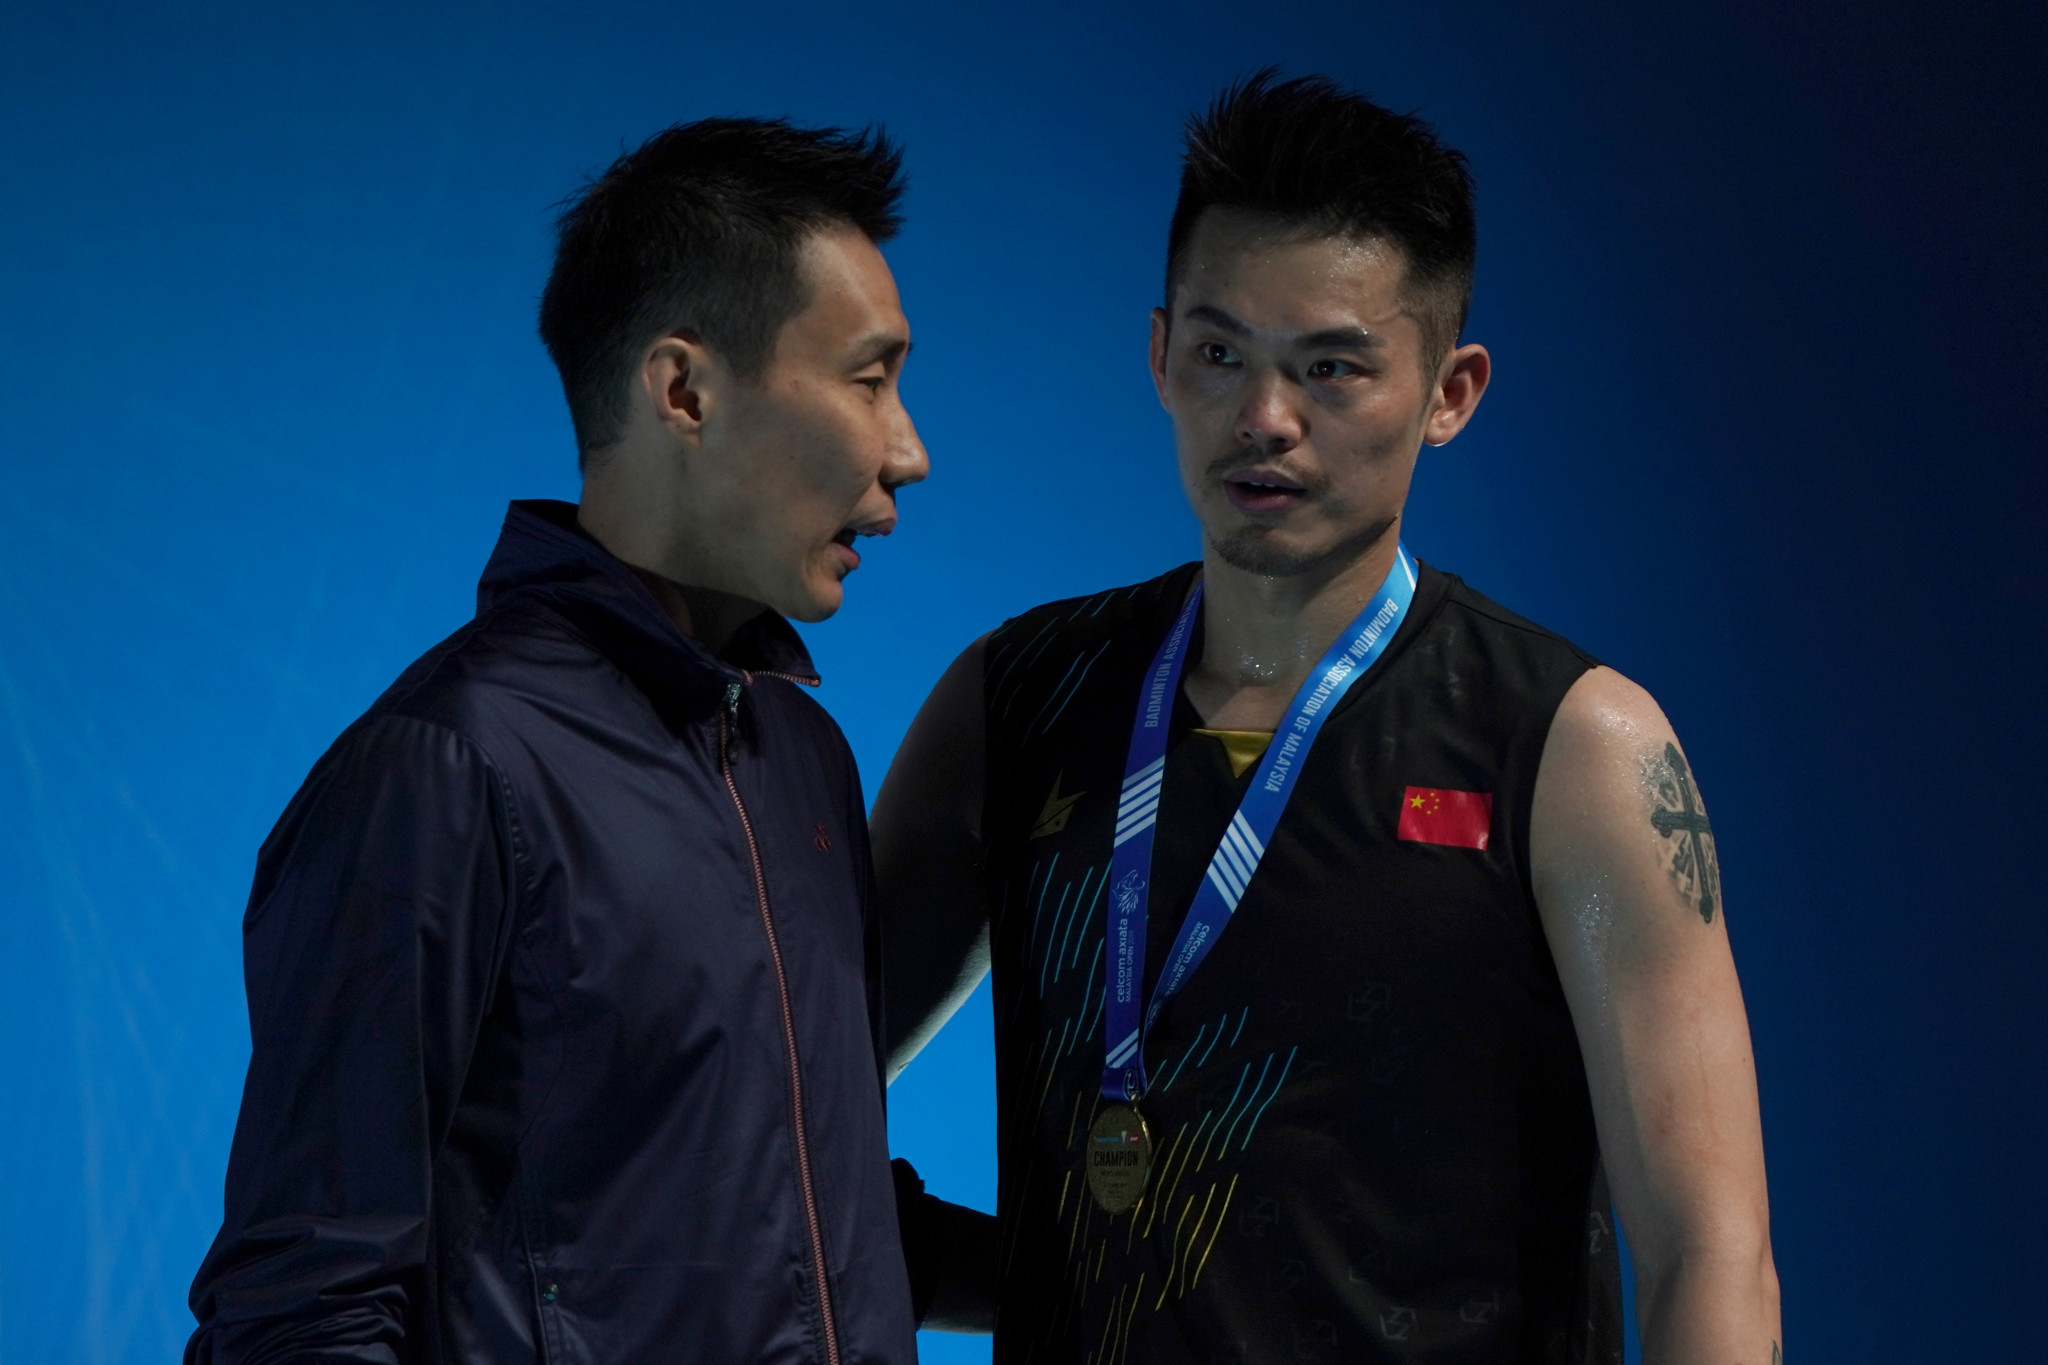 Rivals Lin Dan and Lee Chong Wei to be inducted in to Badminton Hall of Fame